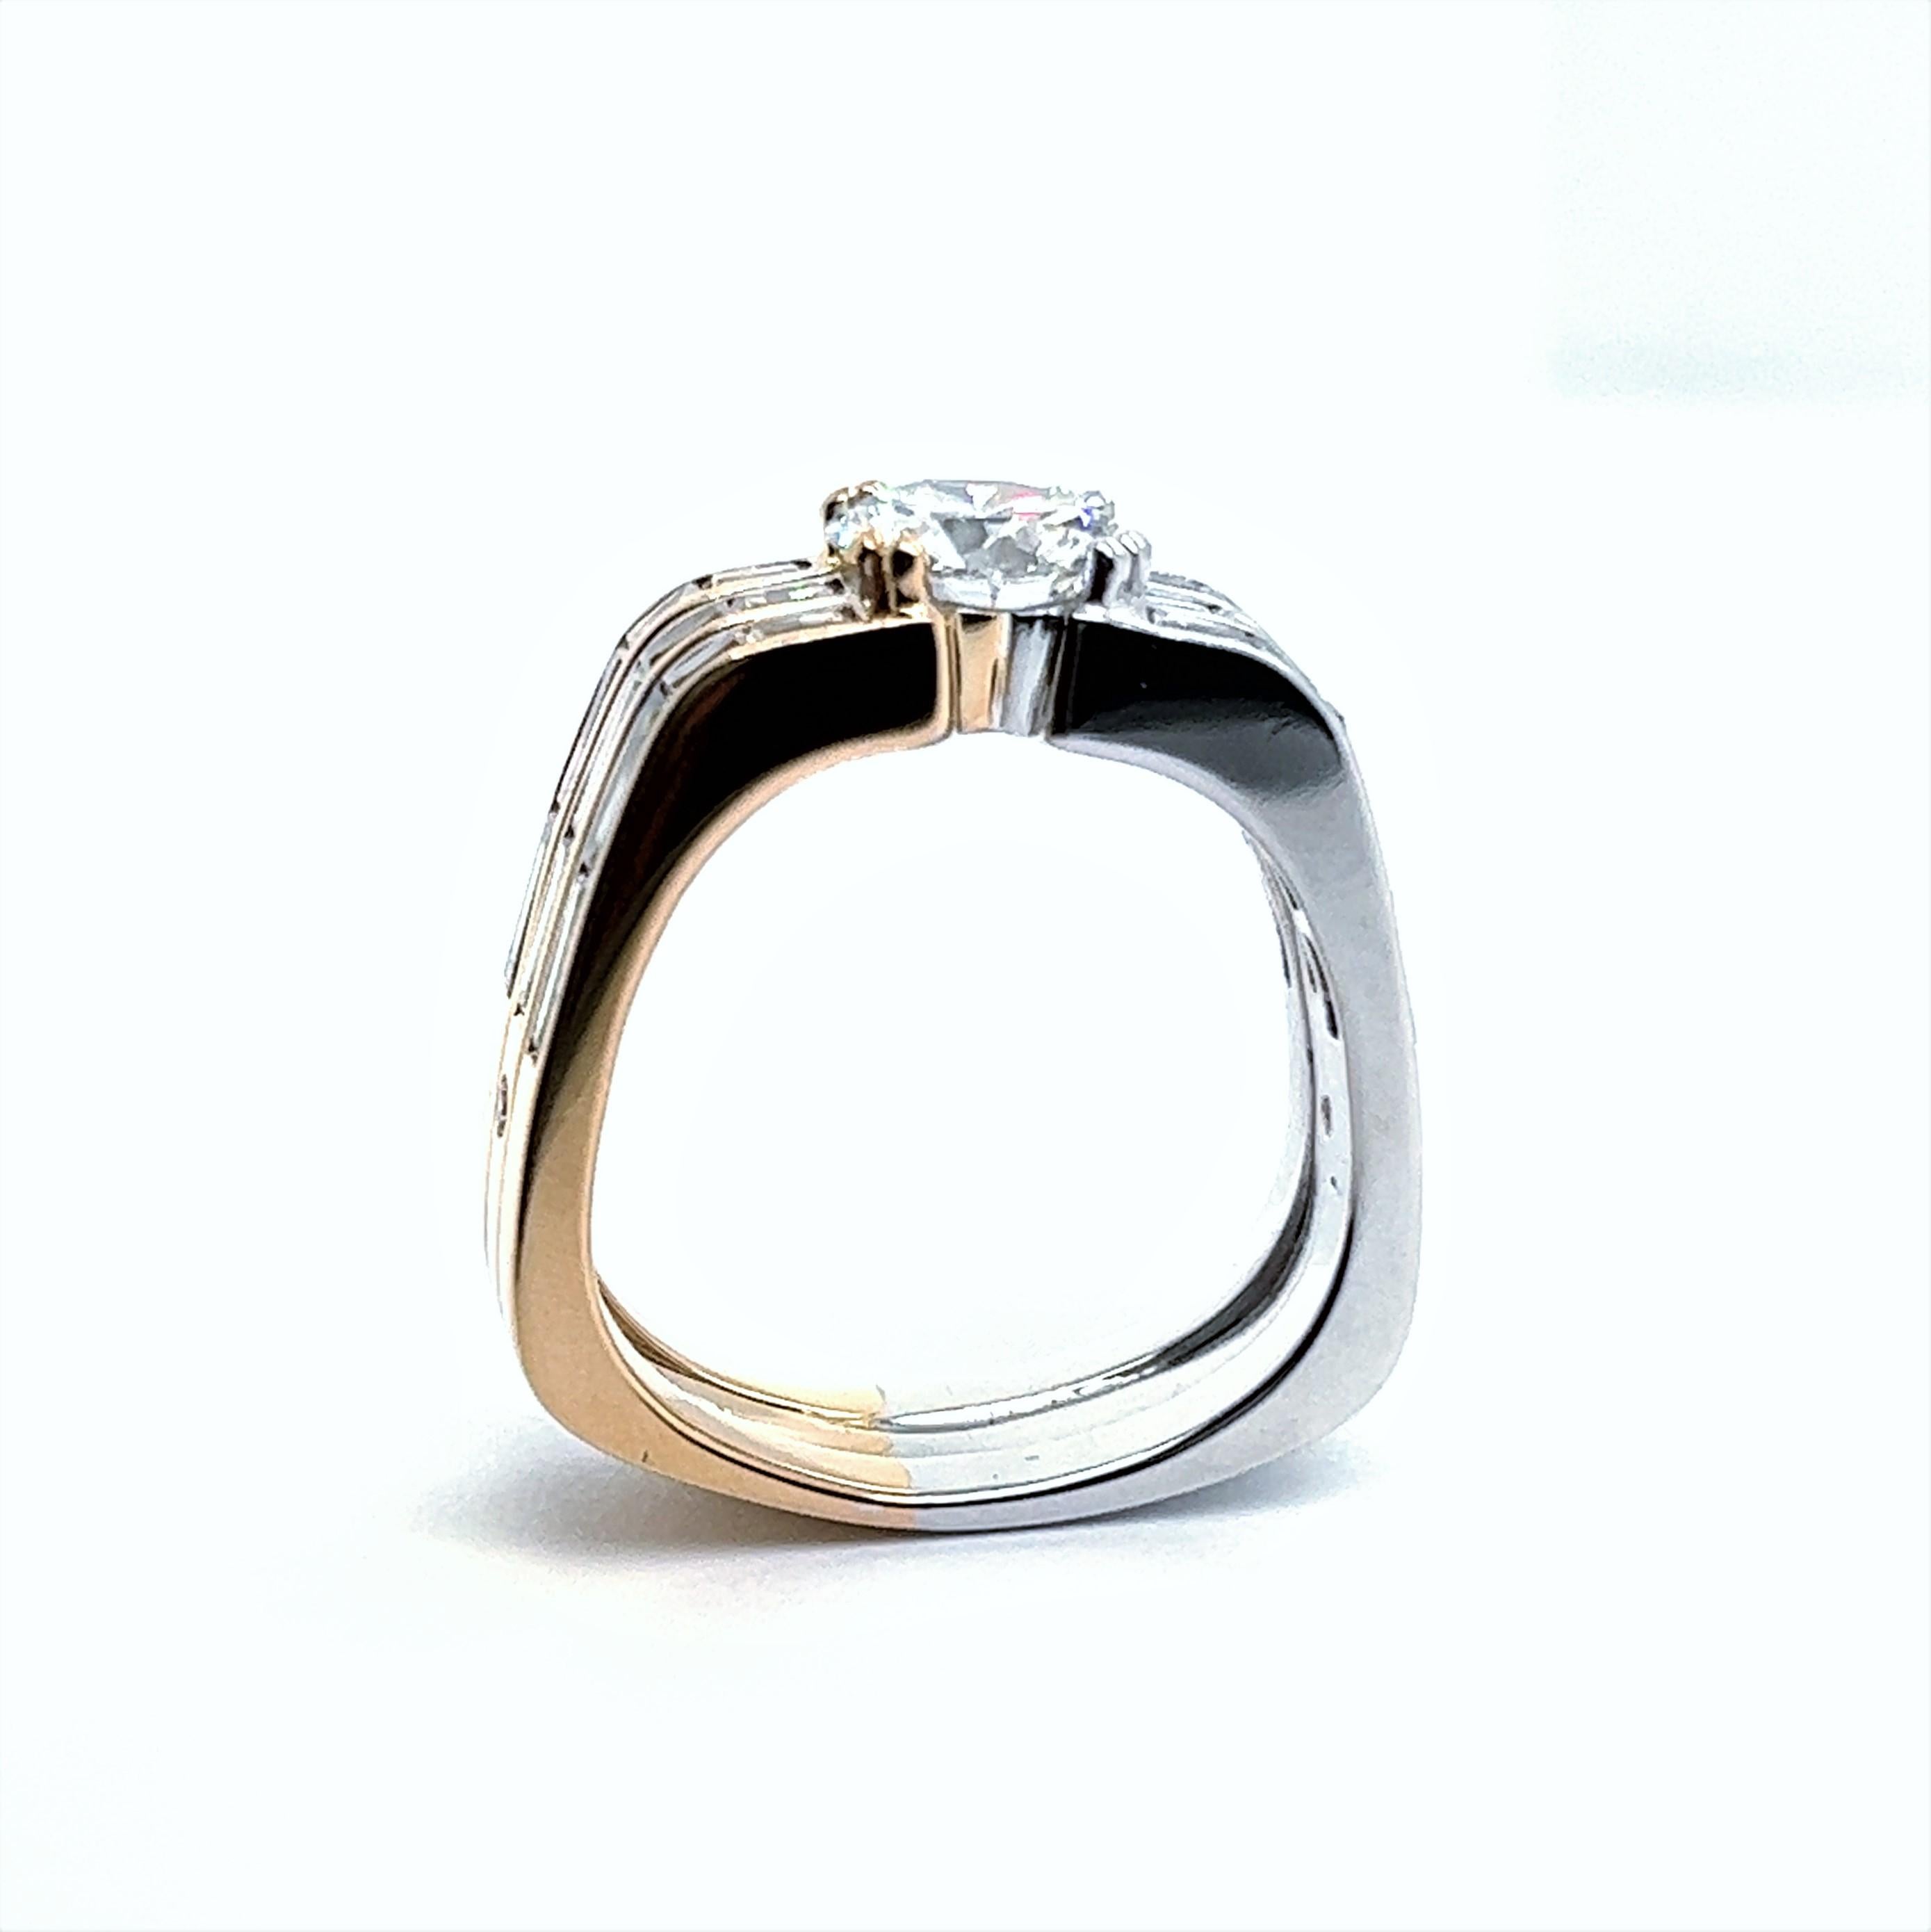 Brilliant Cut Graphic Diamond Ring in 18 Karat White and Red Gold by Binder For Sale